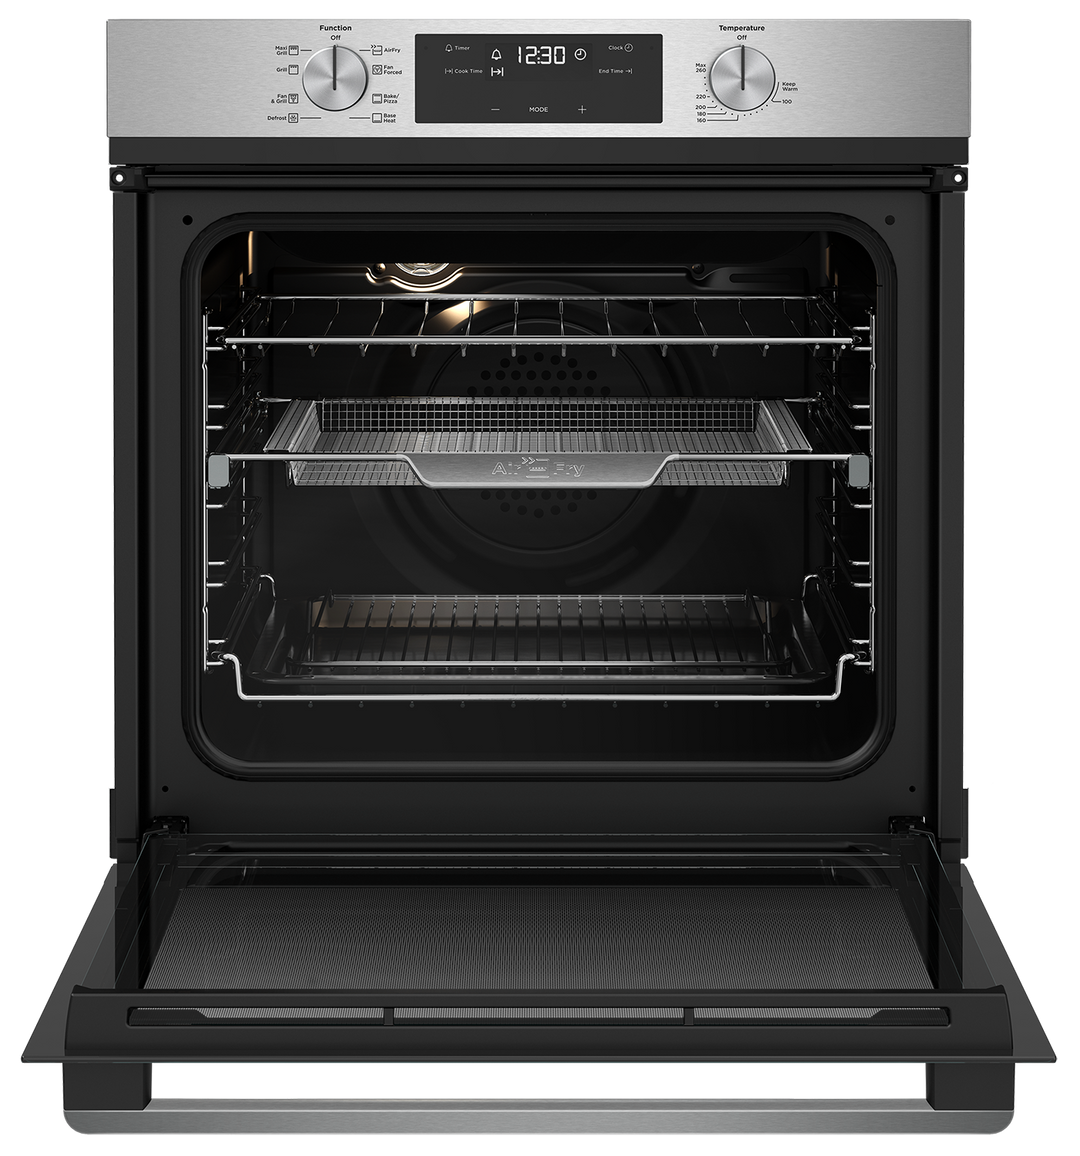 Westinghouse WVE616SC 60 cm Multifunction Oven Stainless Steel